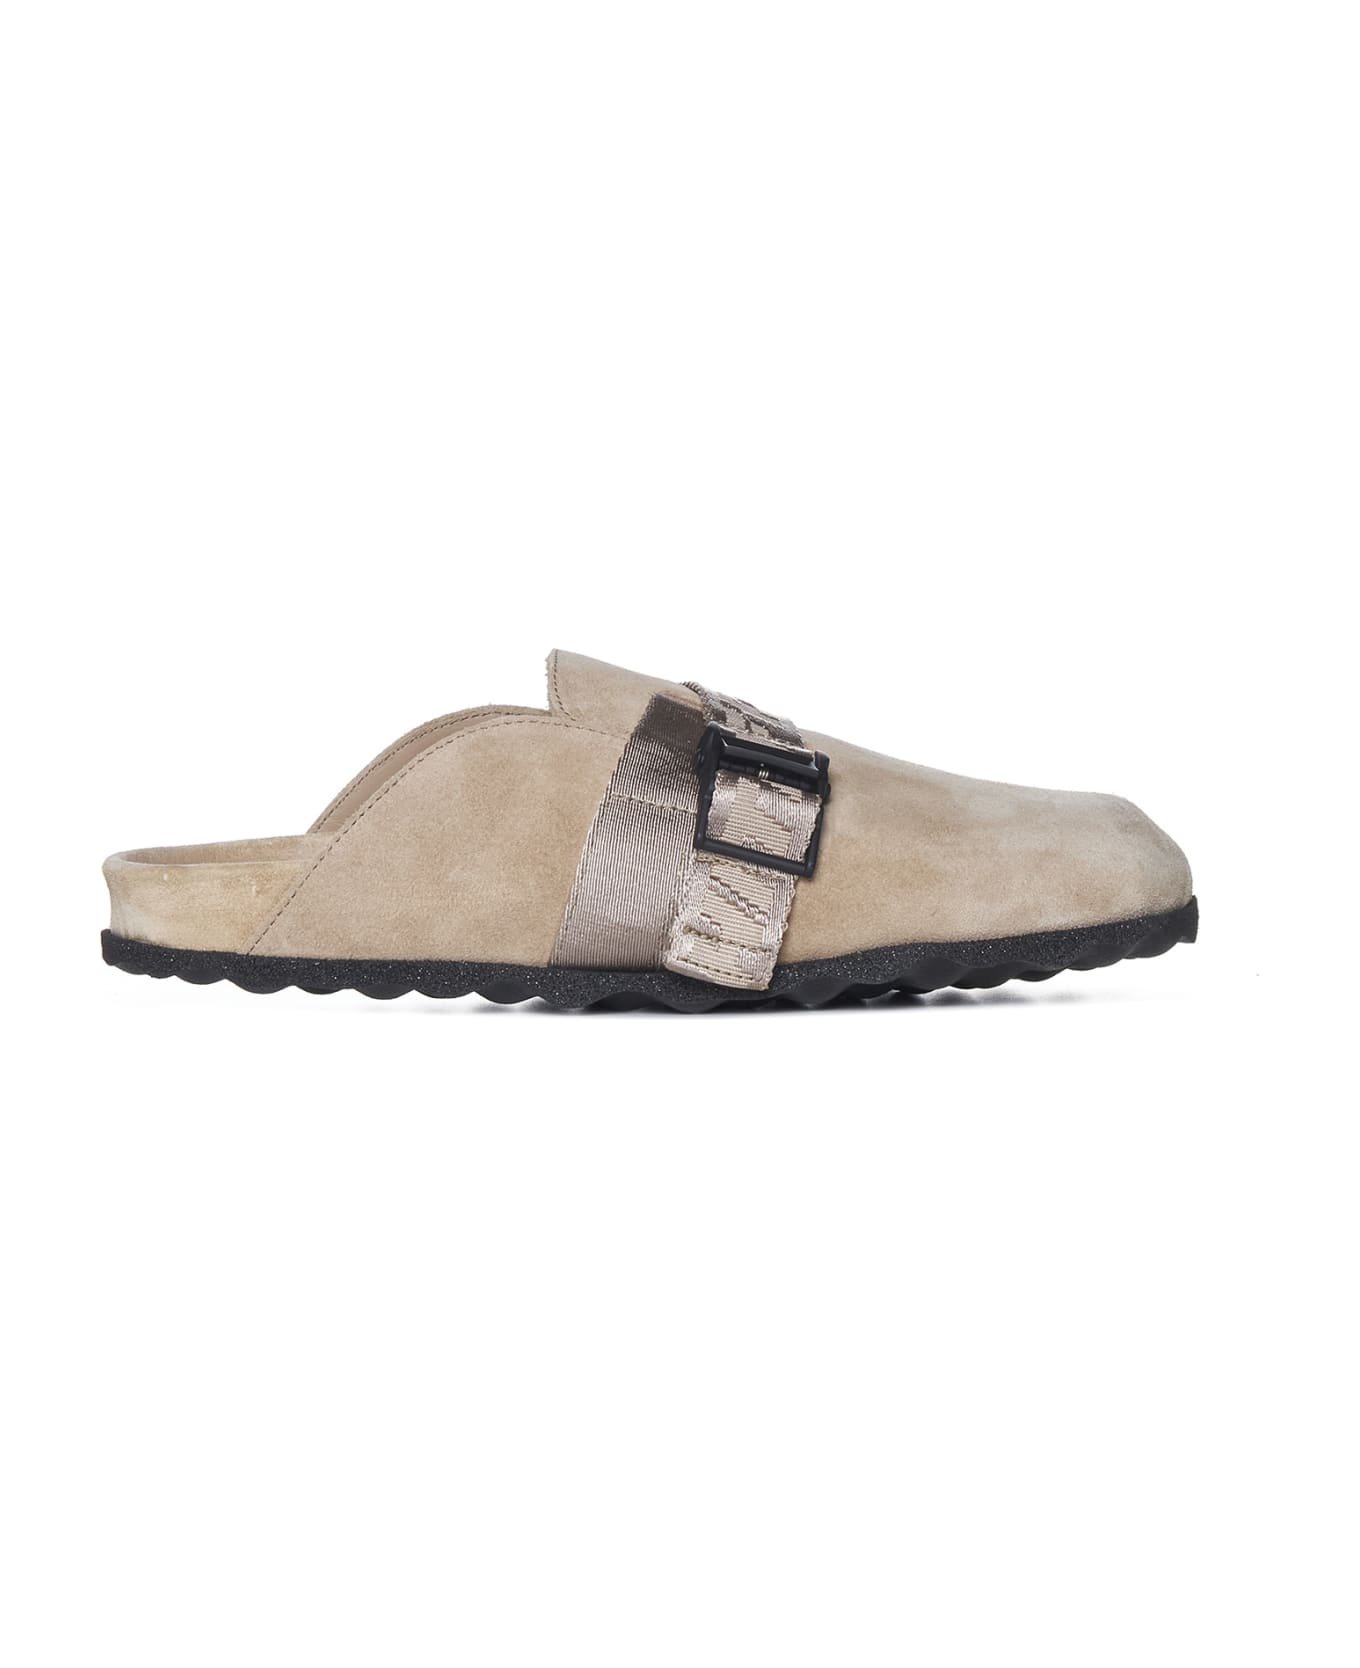 Off-White Flat Shoes - Sand sand